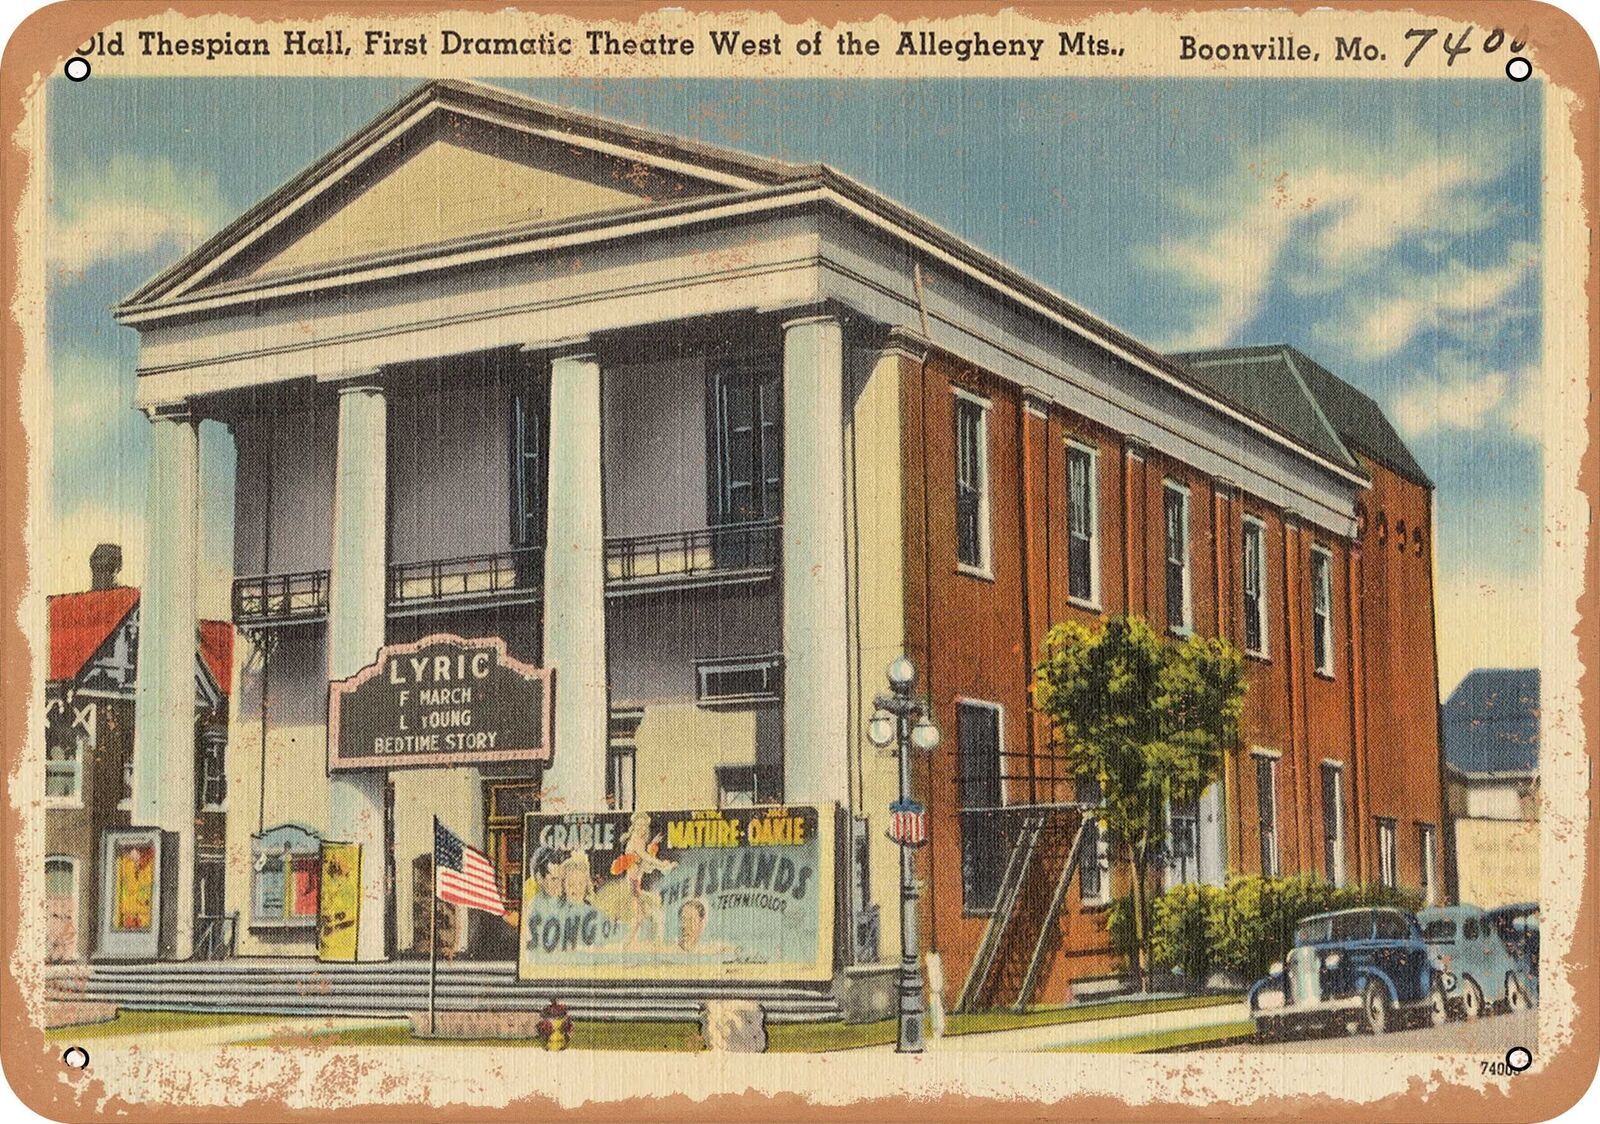 Metal Sign - Missouri Postcard - Old Thespian Hall, first dramatic theatre West